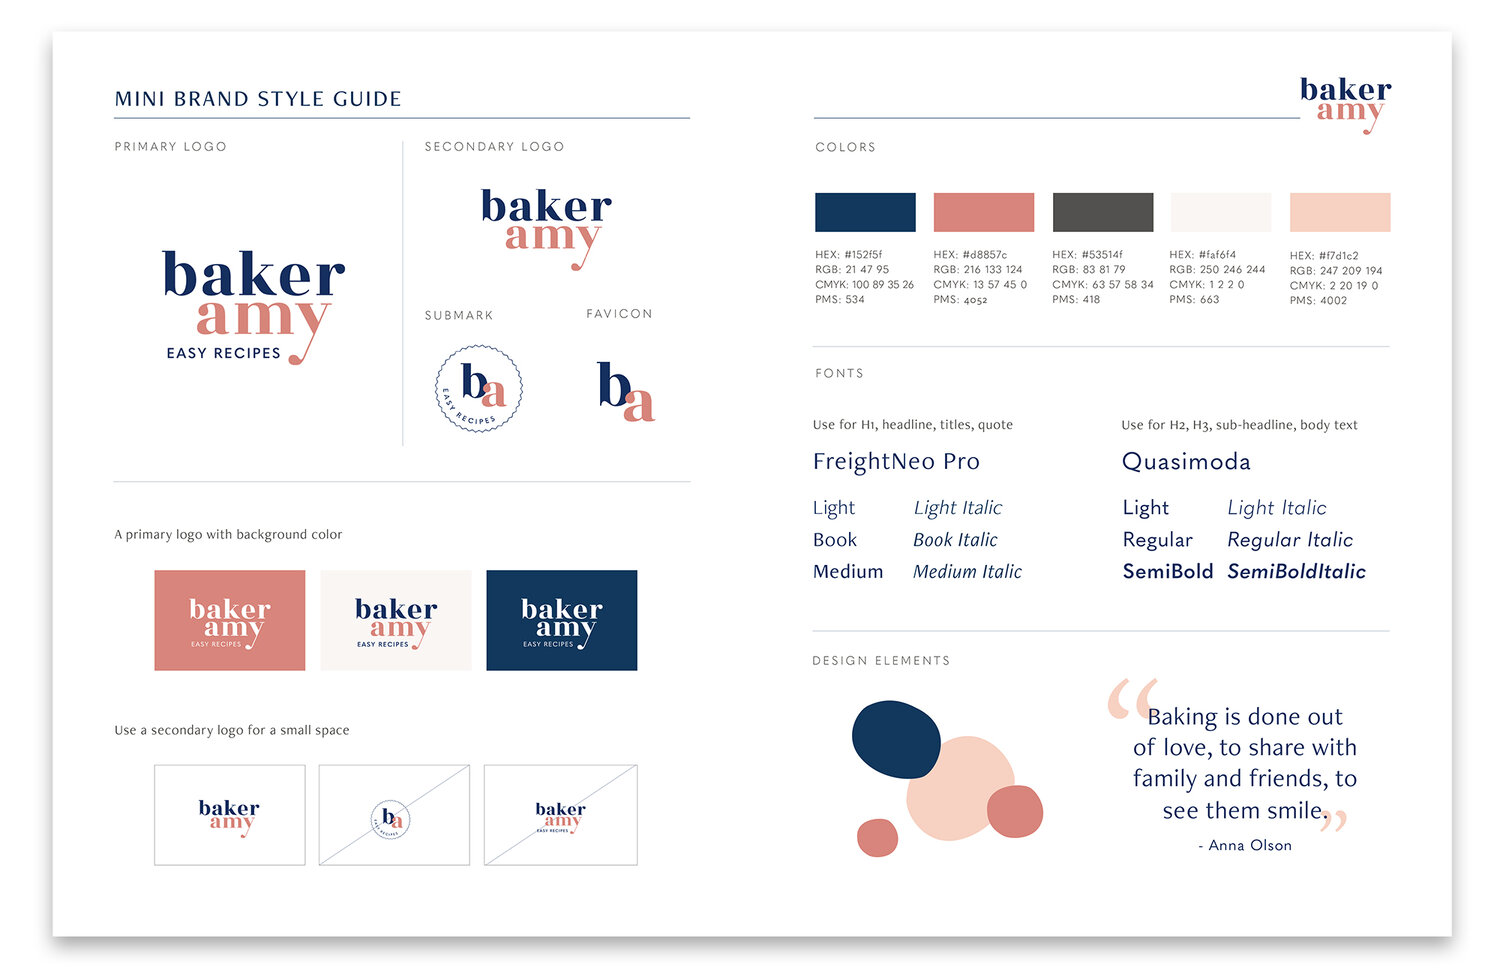 The style guide for Baker Amy lists all the fonts and colors used.